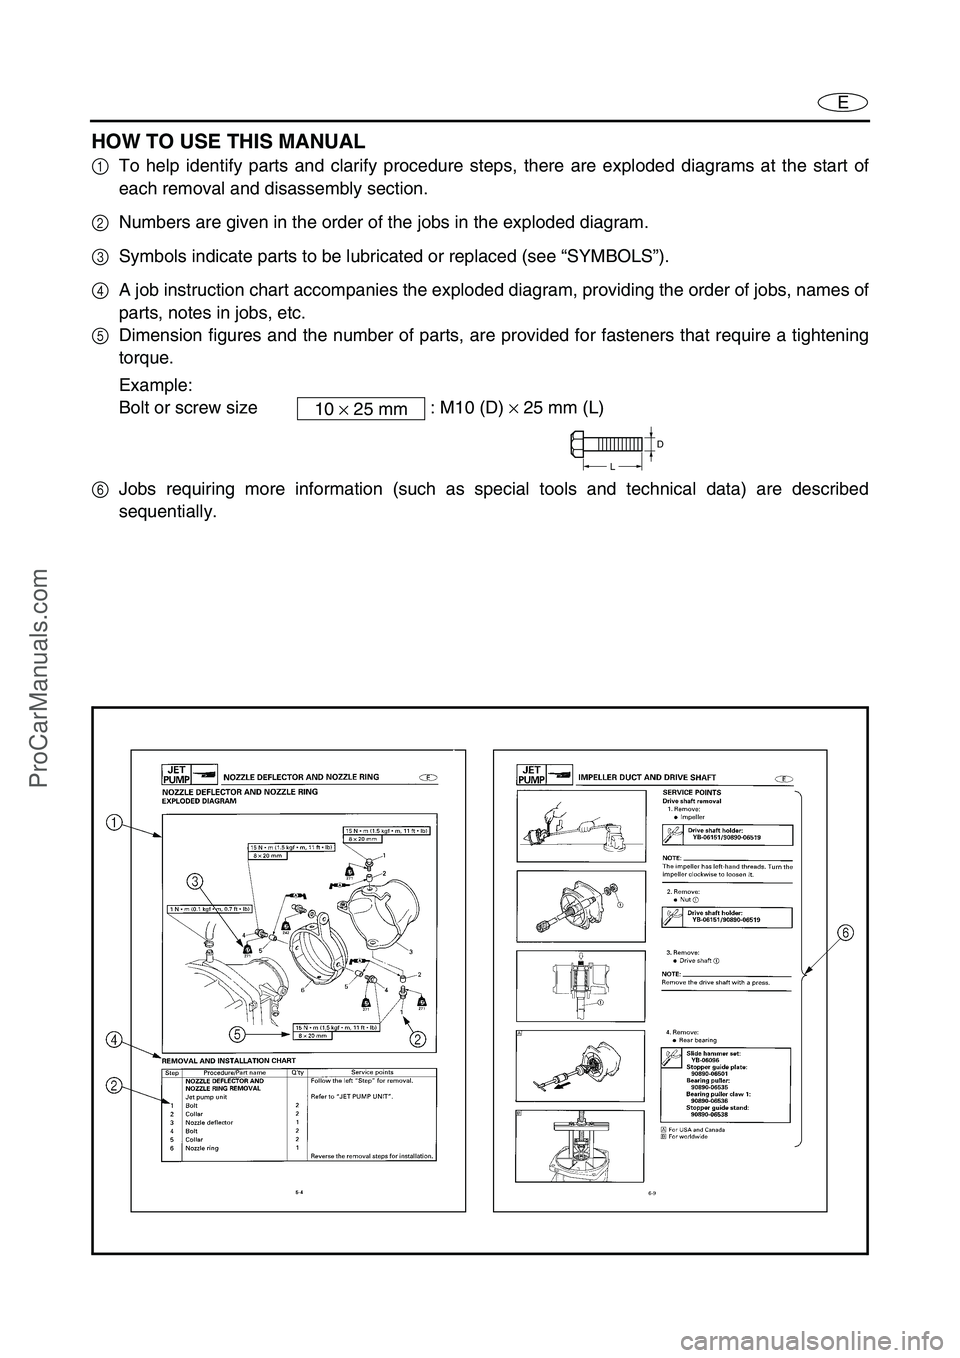 YAMAHA VX110 2005  Service Manual E
HOW TO USE THIS MANUAL
1To help identify parts and clarify procedure steps, there are exploded diagrams at the start of
each removal and disassembly section.
2Numbers are given in the order of the j